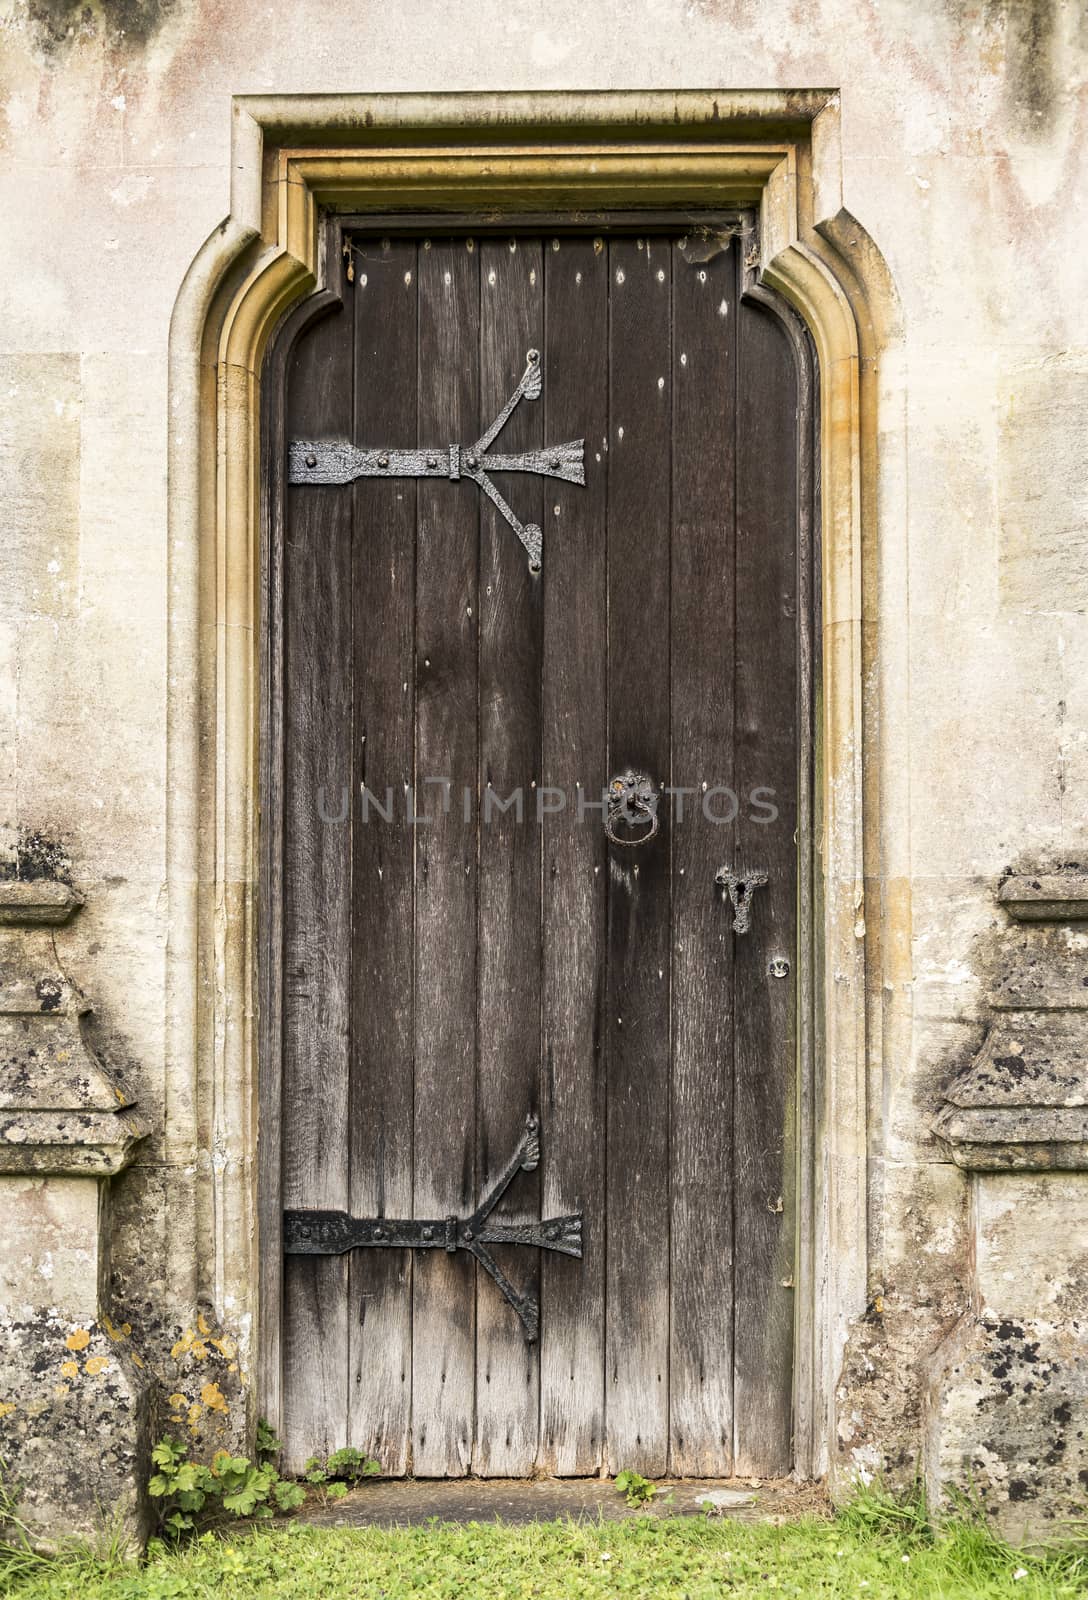 The beautifully detailed doorway of a British church